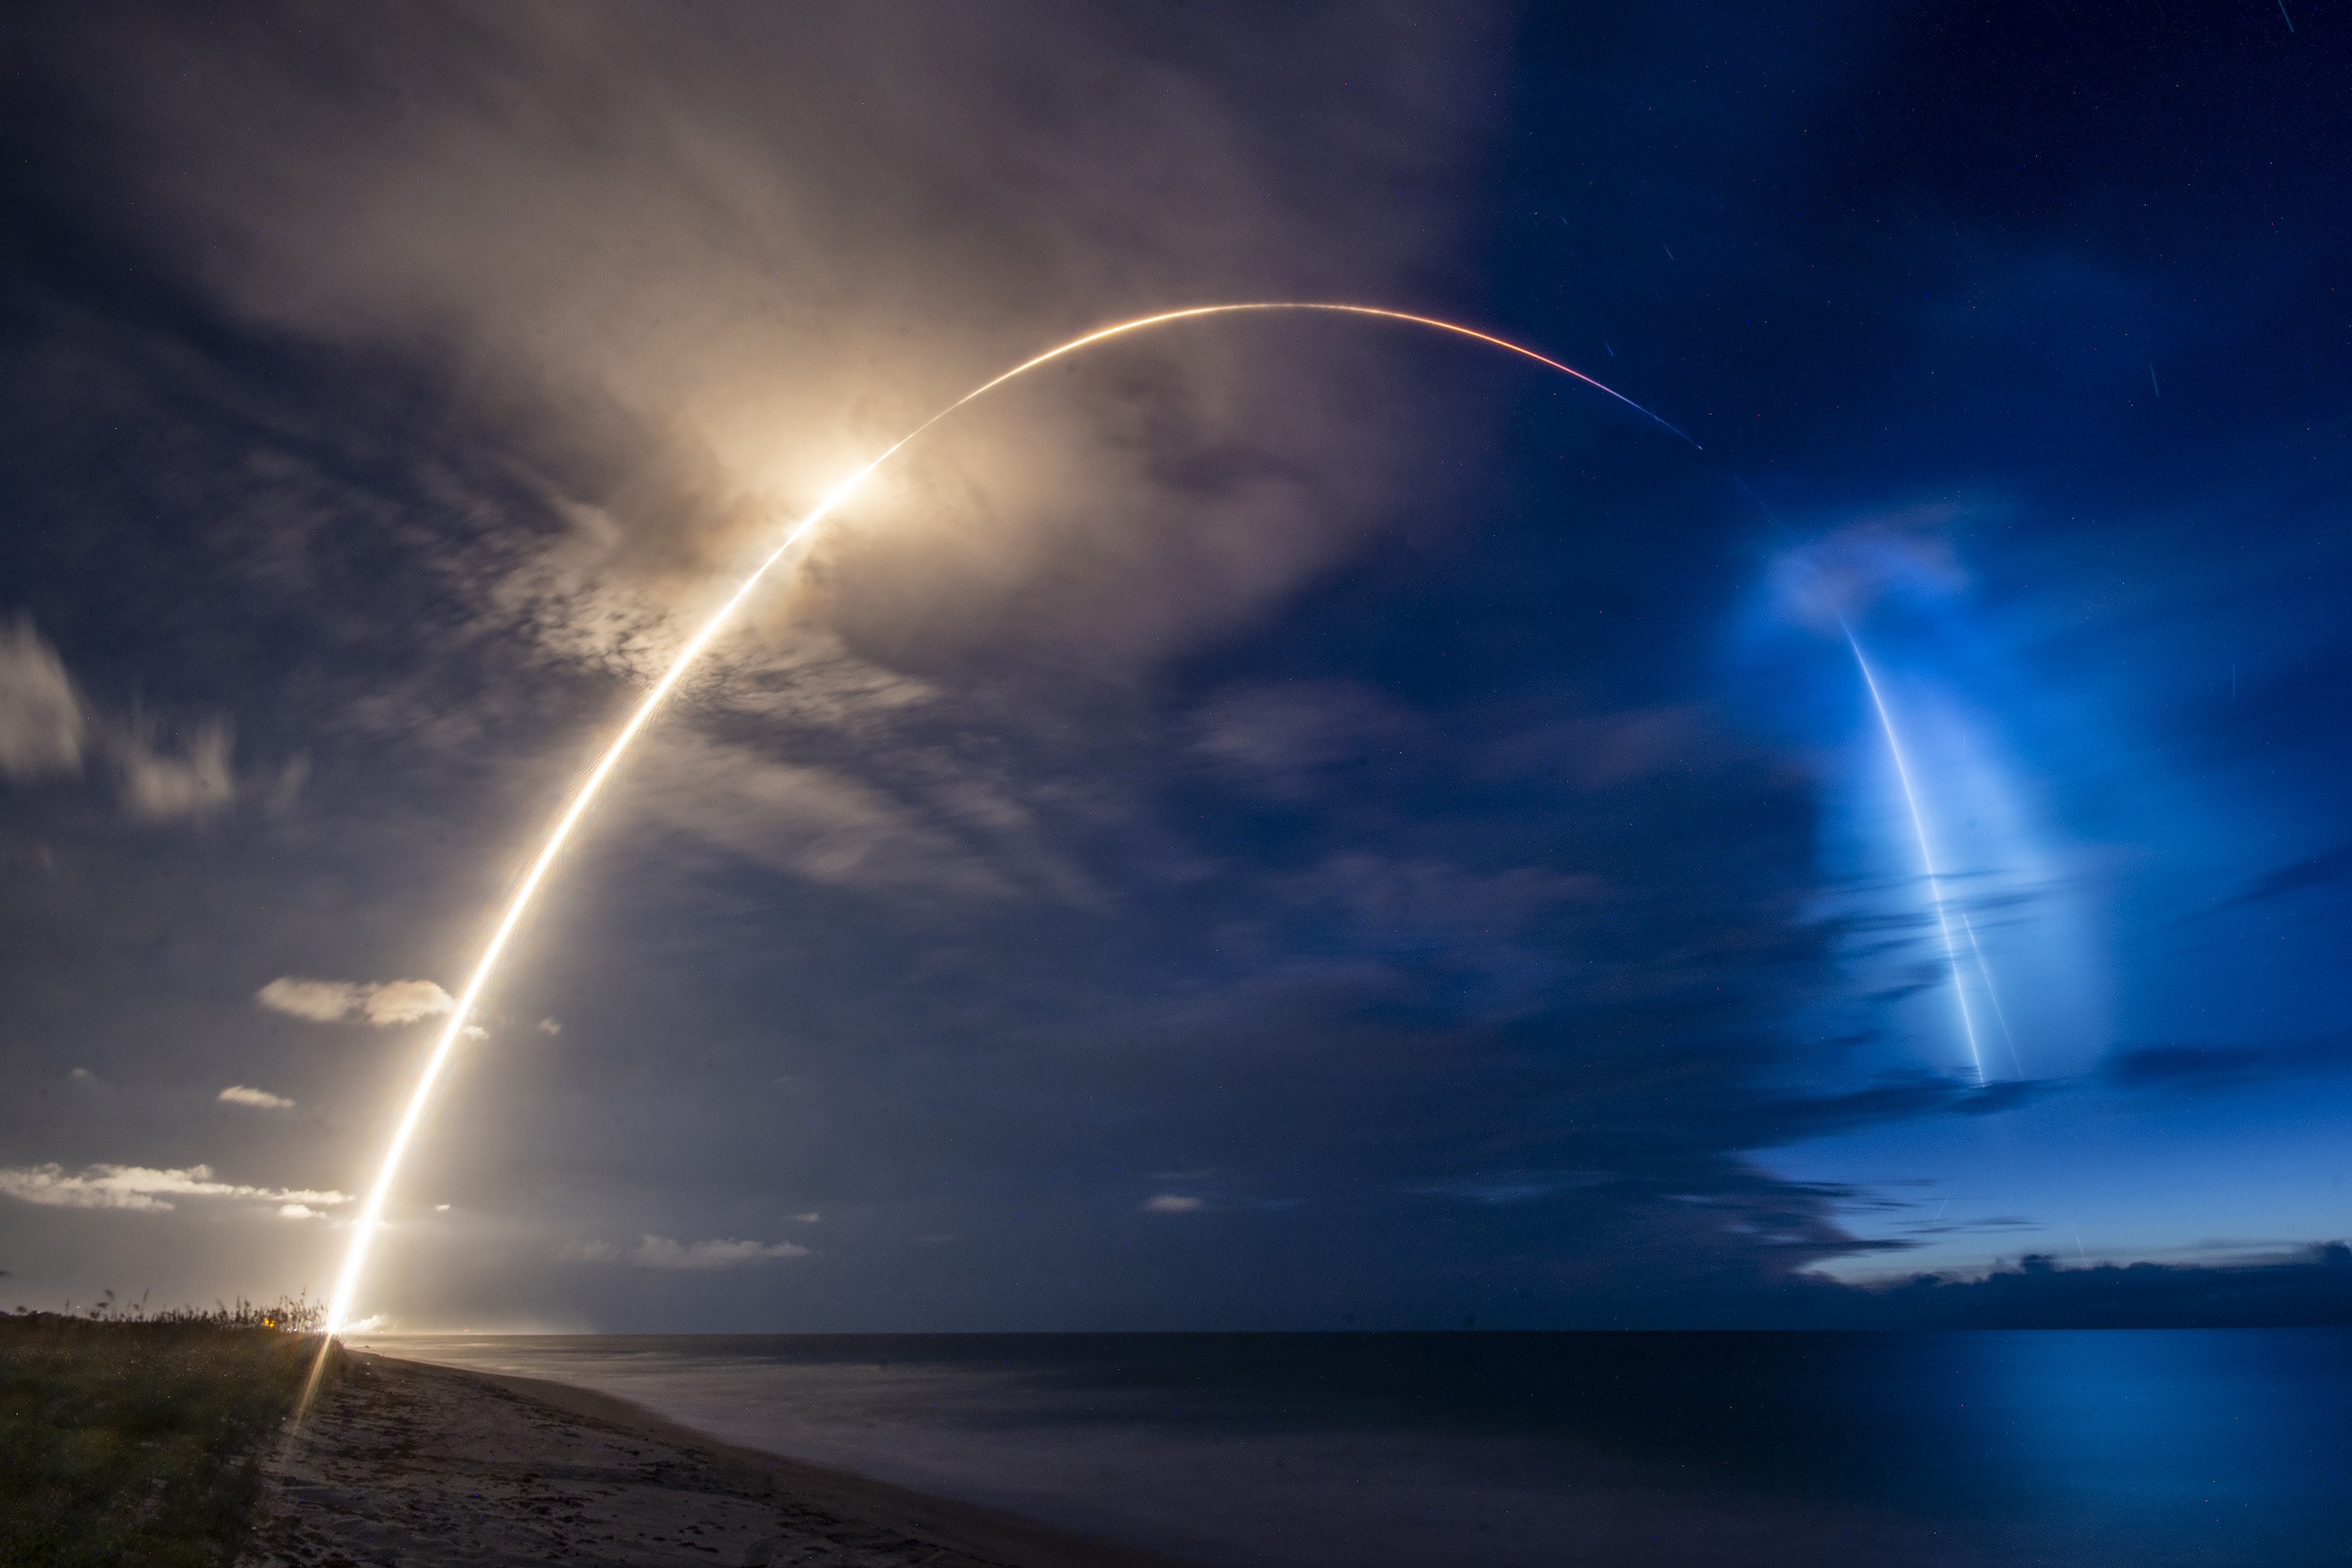 SpaceX Plans to Bring Internet to 5 Million US Households